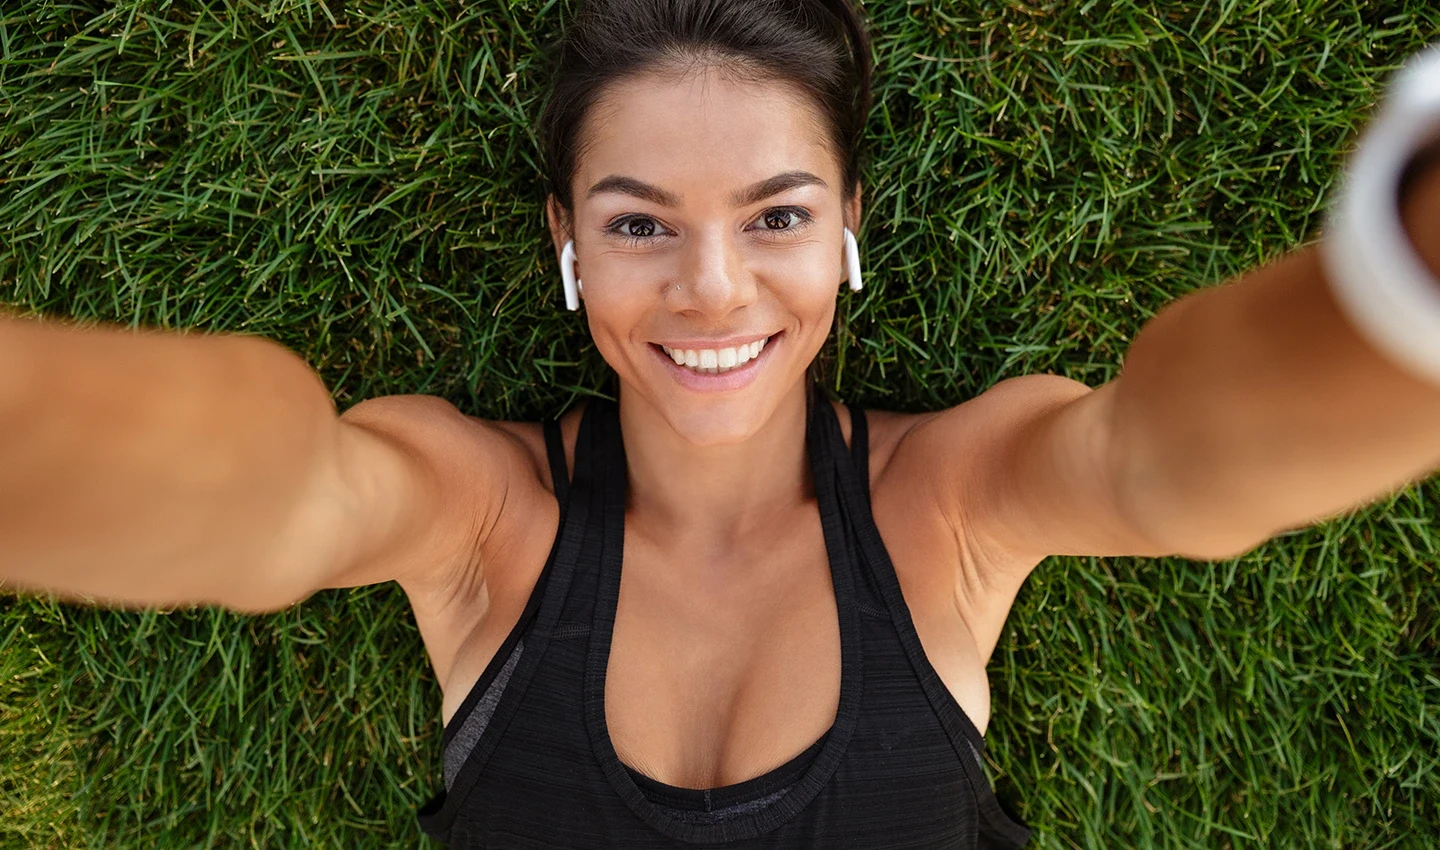 An athletic woman lying on the grass and smiling, symbolizing the positive outcome of lifestyle changes made in preparation for facelift surgery.An athletic woman lying on the grass and smiling, symbolizing the positive outcome of lifestyle changes made in preparation for facelift surgery.